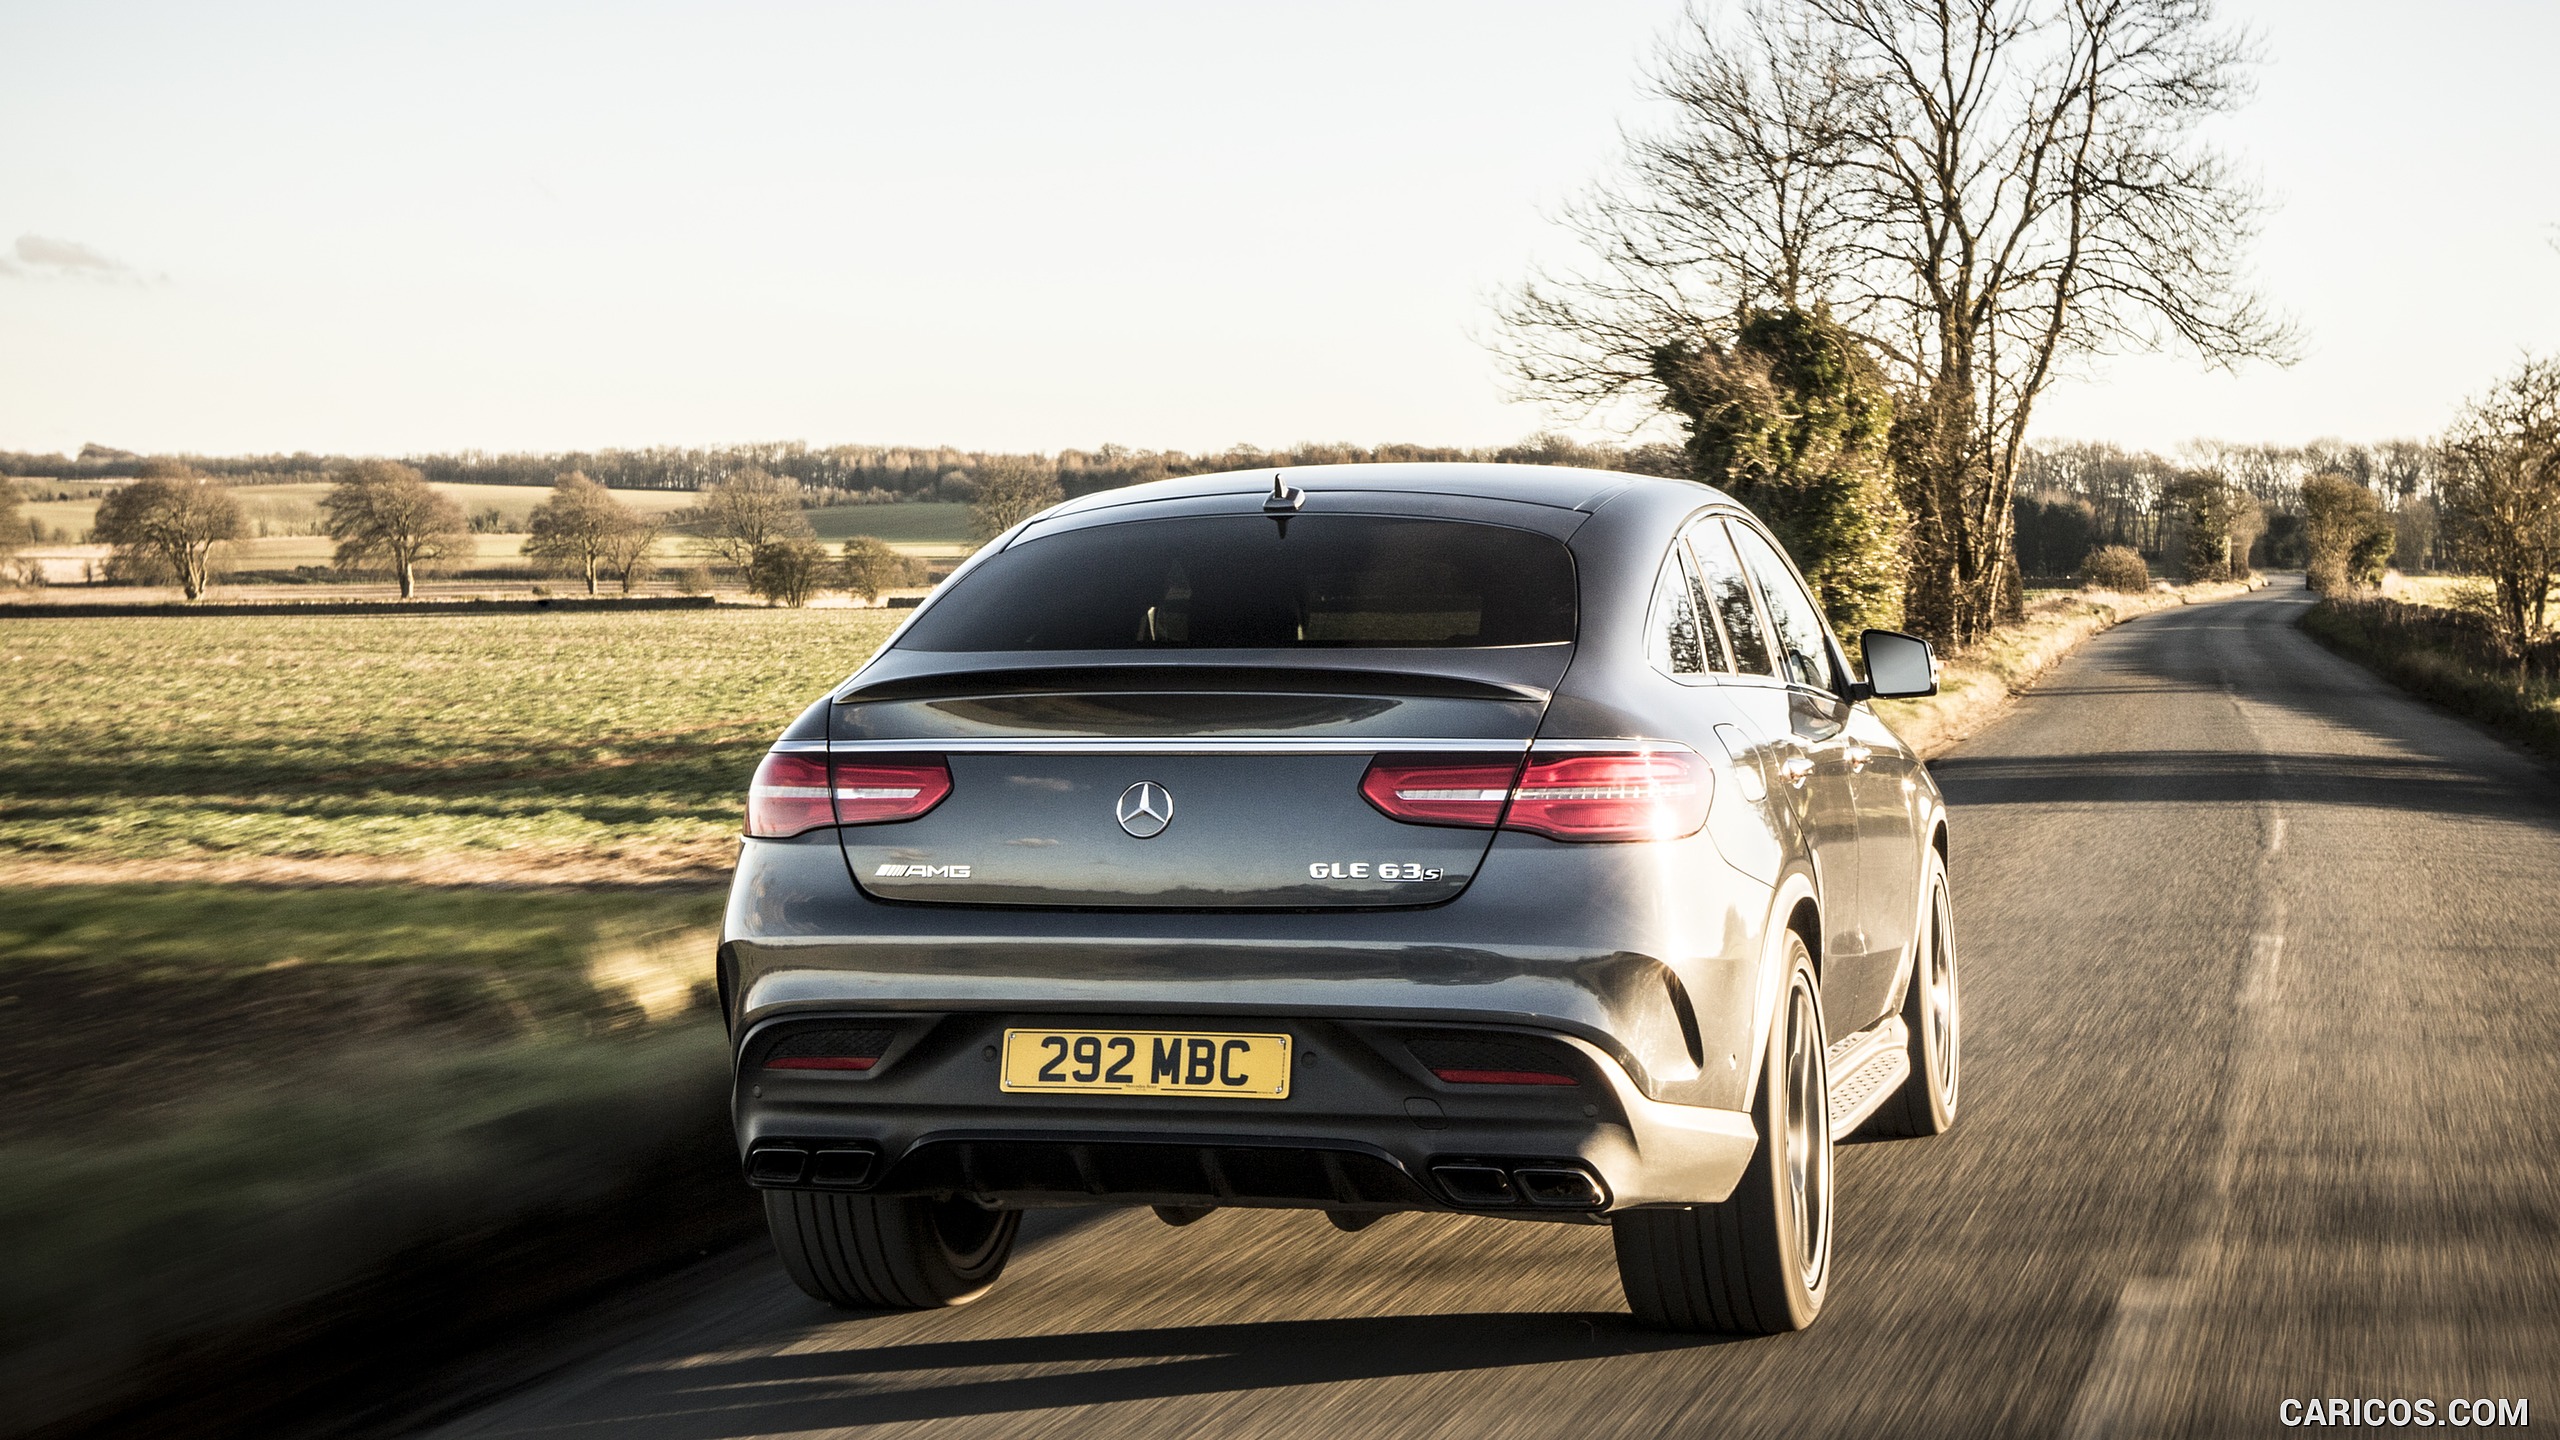 2016 Mercedes-AMG GLE 63 S Coupe (UK-Spec) - Rear, #46 of 65